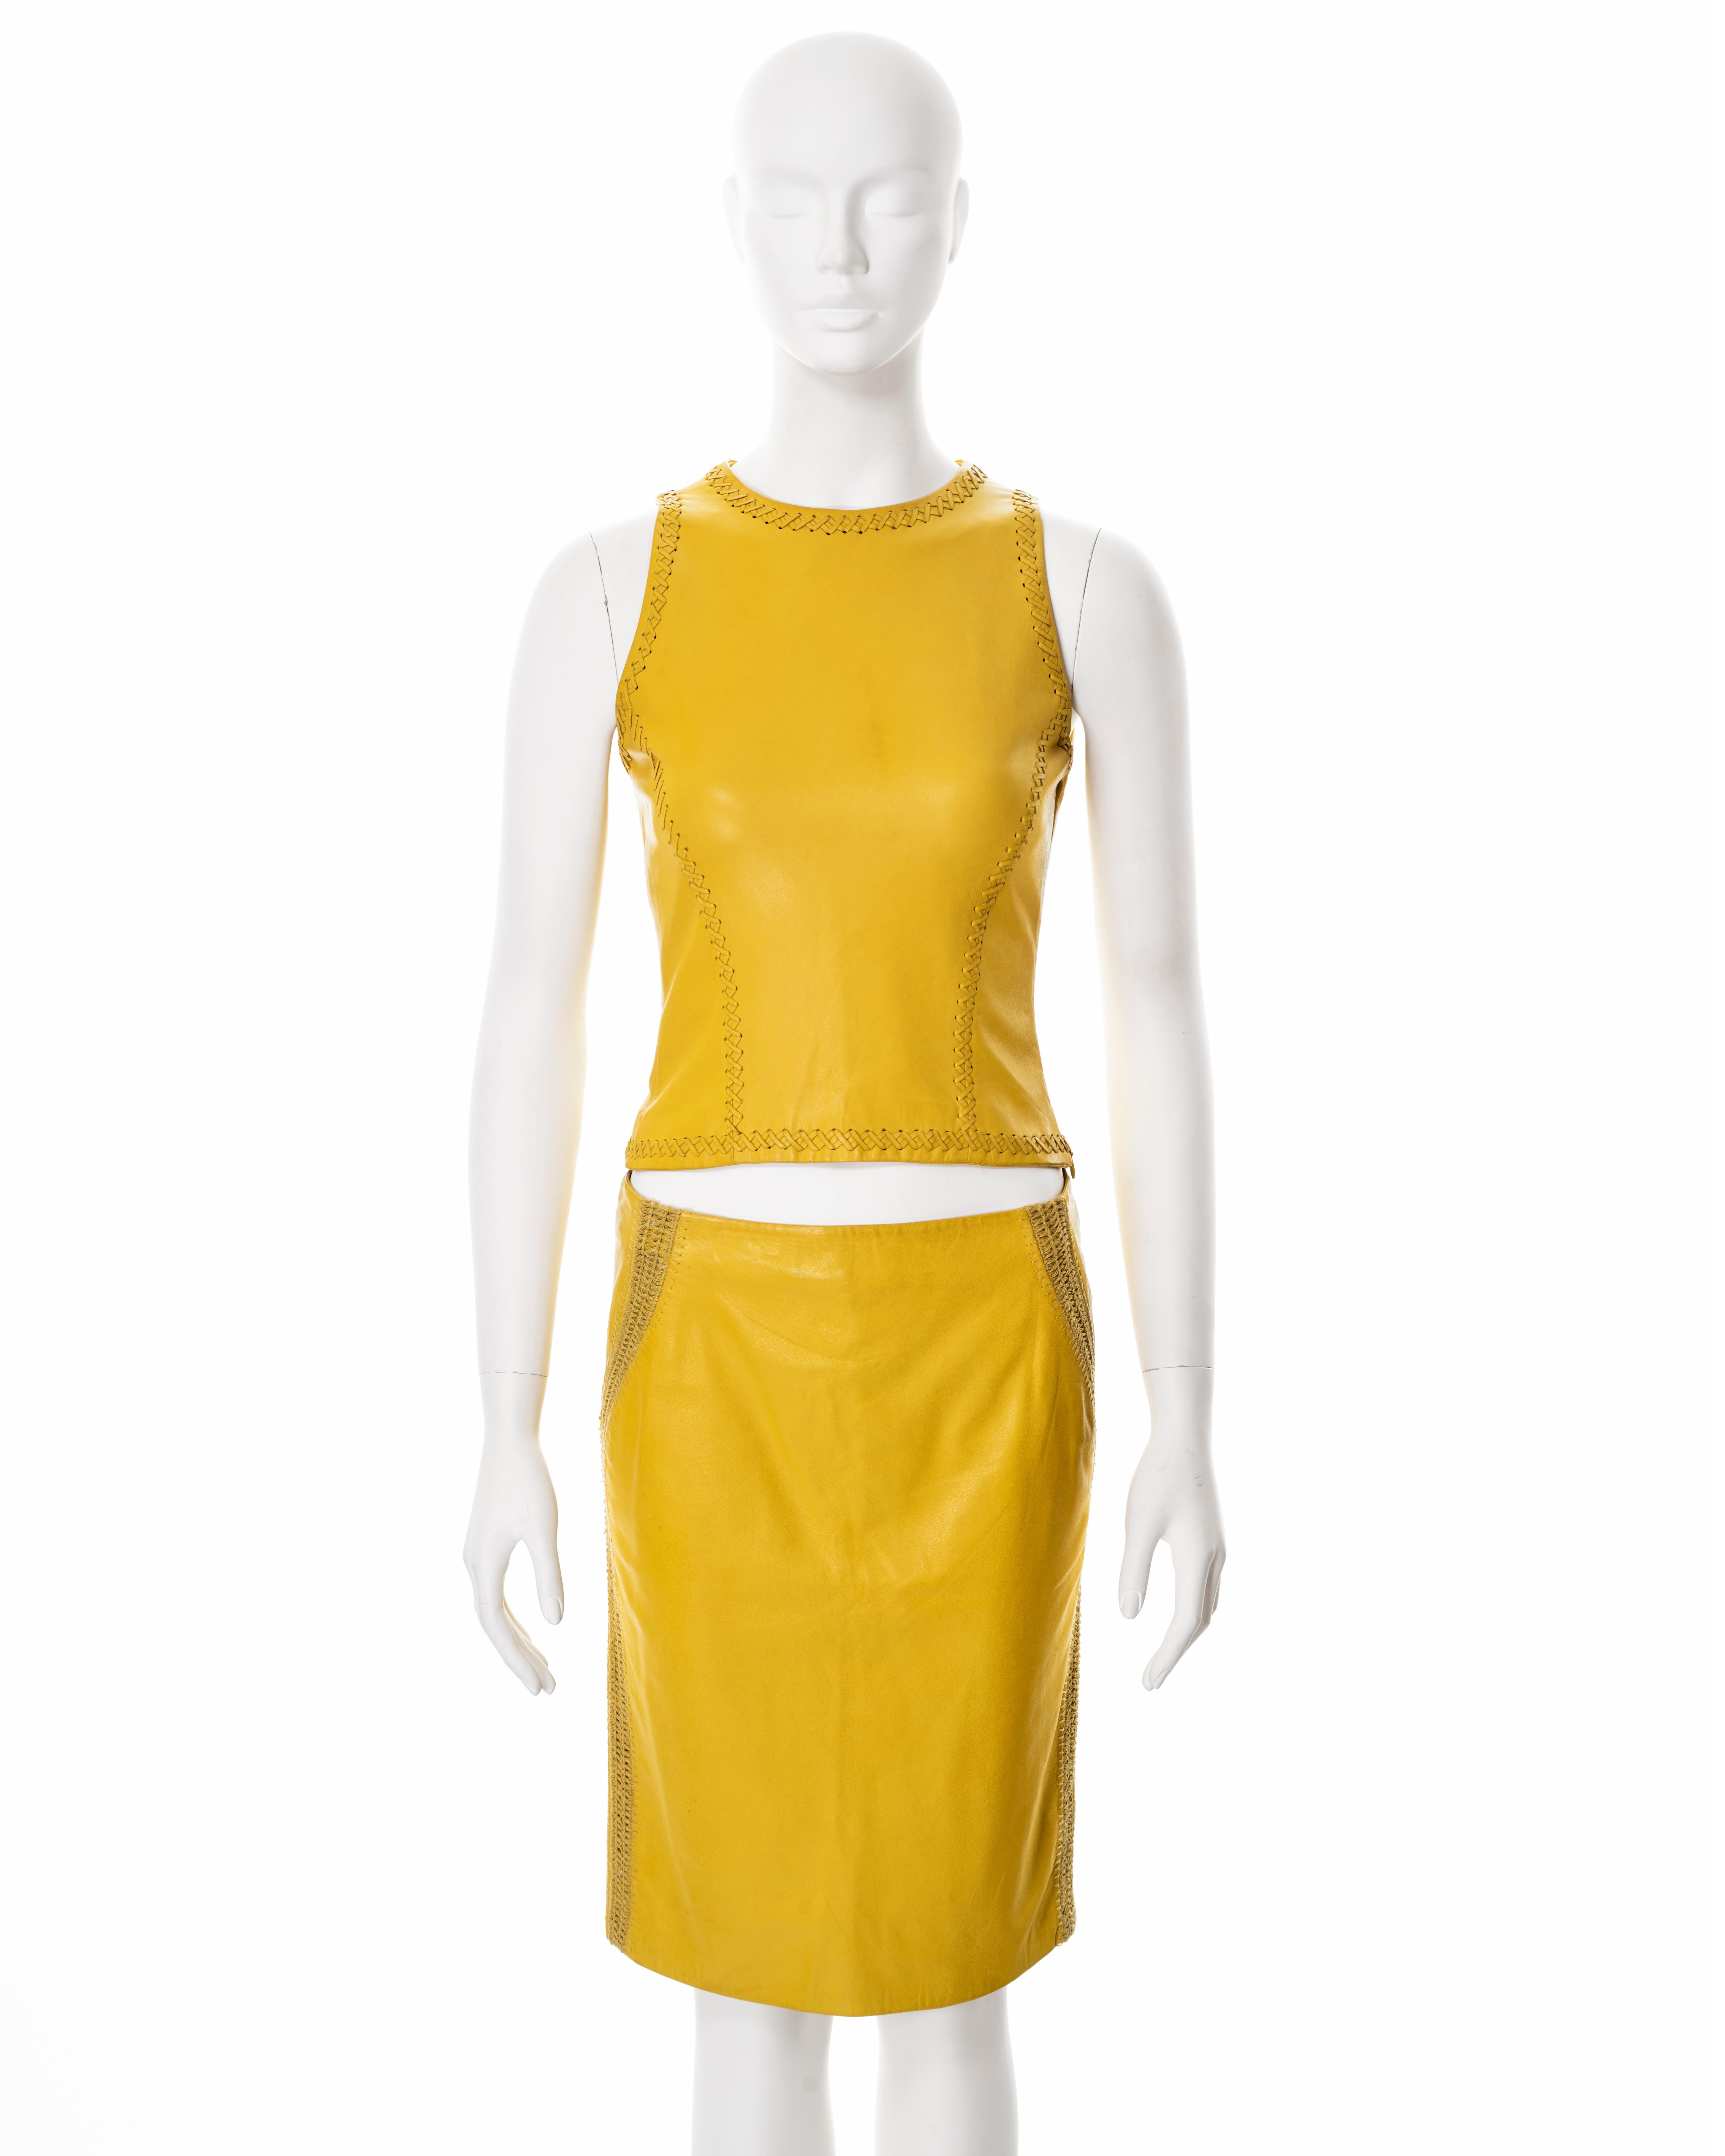 ▪ Gianni Versace leather top and skirt set
▪ Creative Director: Donatella Versace
▪ Sold by One of a Kind Archive
▪ Constructed from yellow lambskin leather 
▪ Fitted leather top with open back and lace-up fastening 
▪ Low-rise pencil skirt with